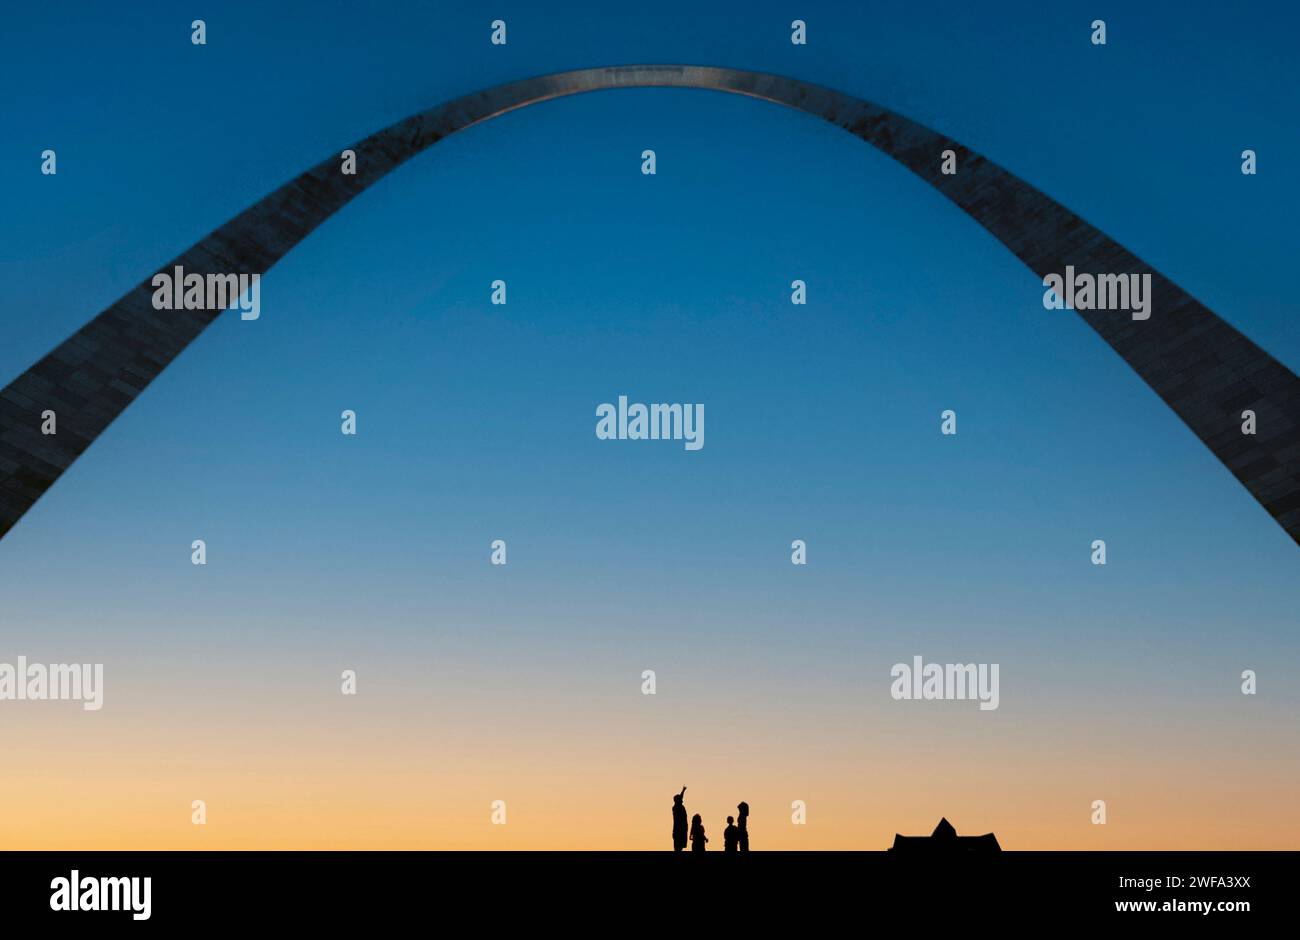 A group of people are silhouetted against the twilight sky underneath the iconic Gateway Arch in St. Louis, Missouri. Stock Photo